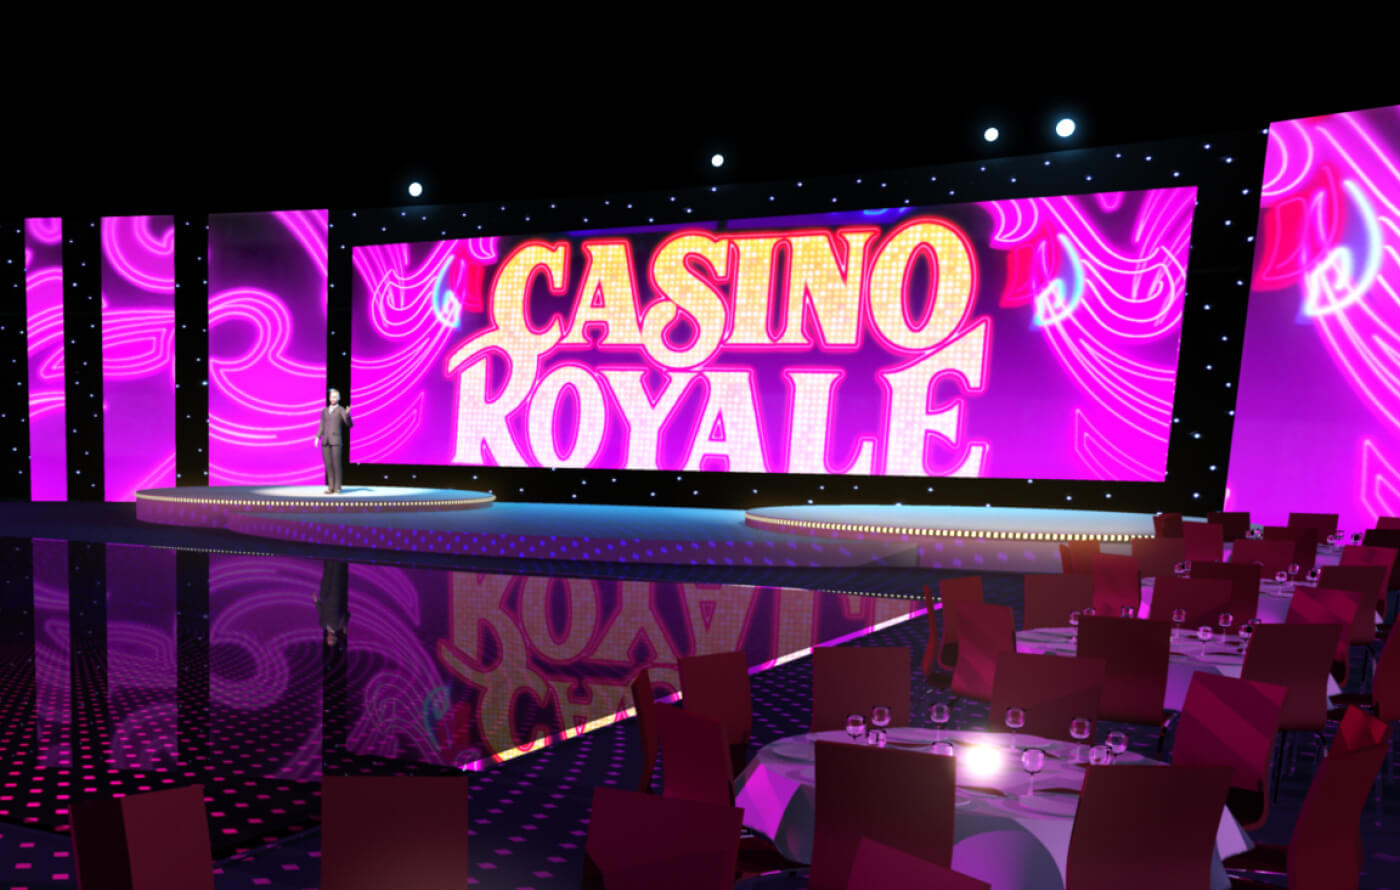 3D render of the Casino Royale animated backdrop, behind a presenter on stage in a dimly lit room